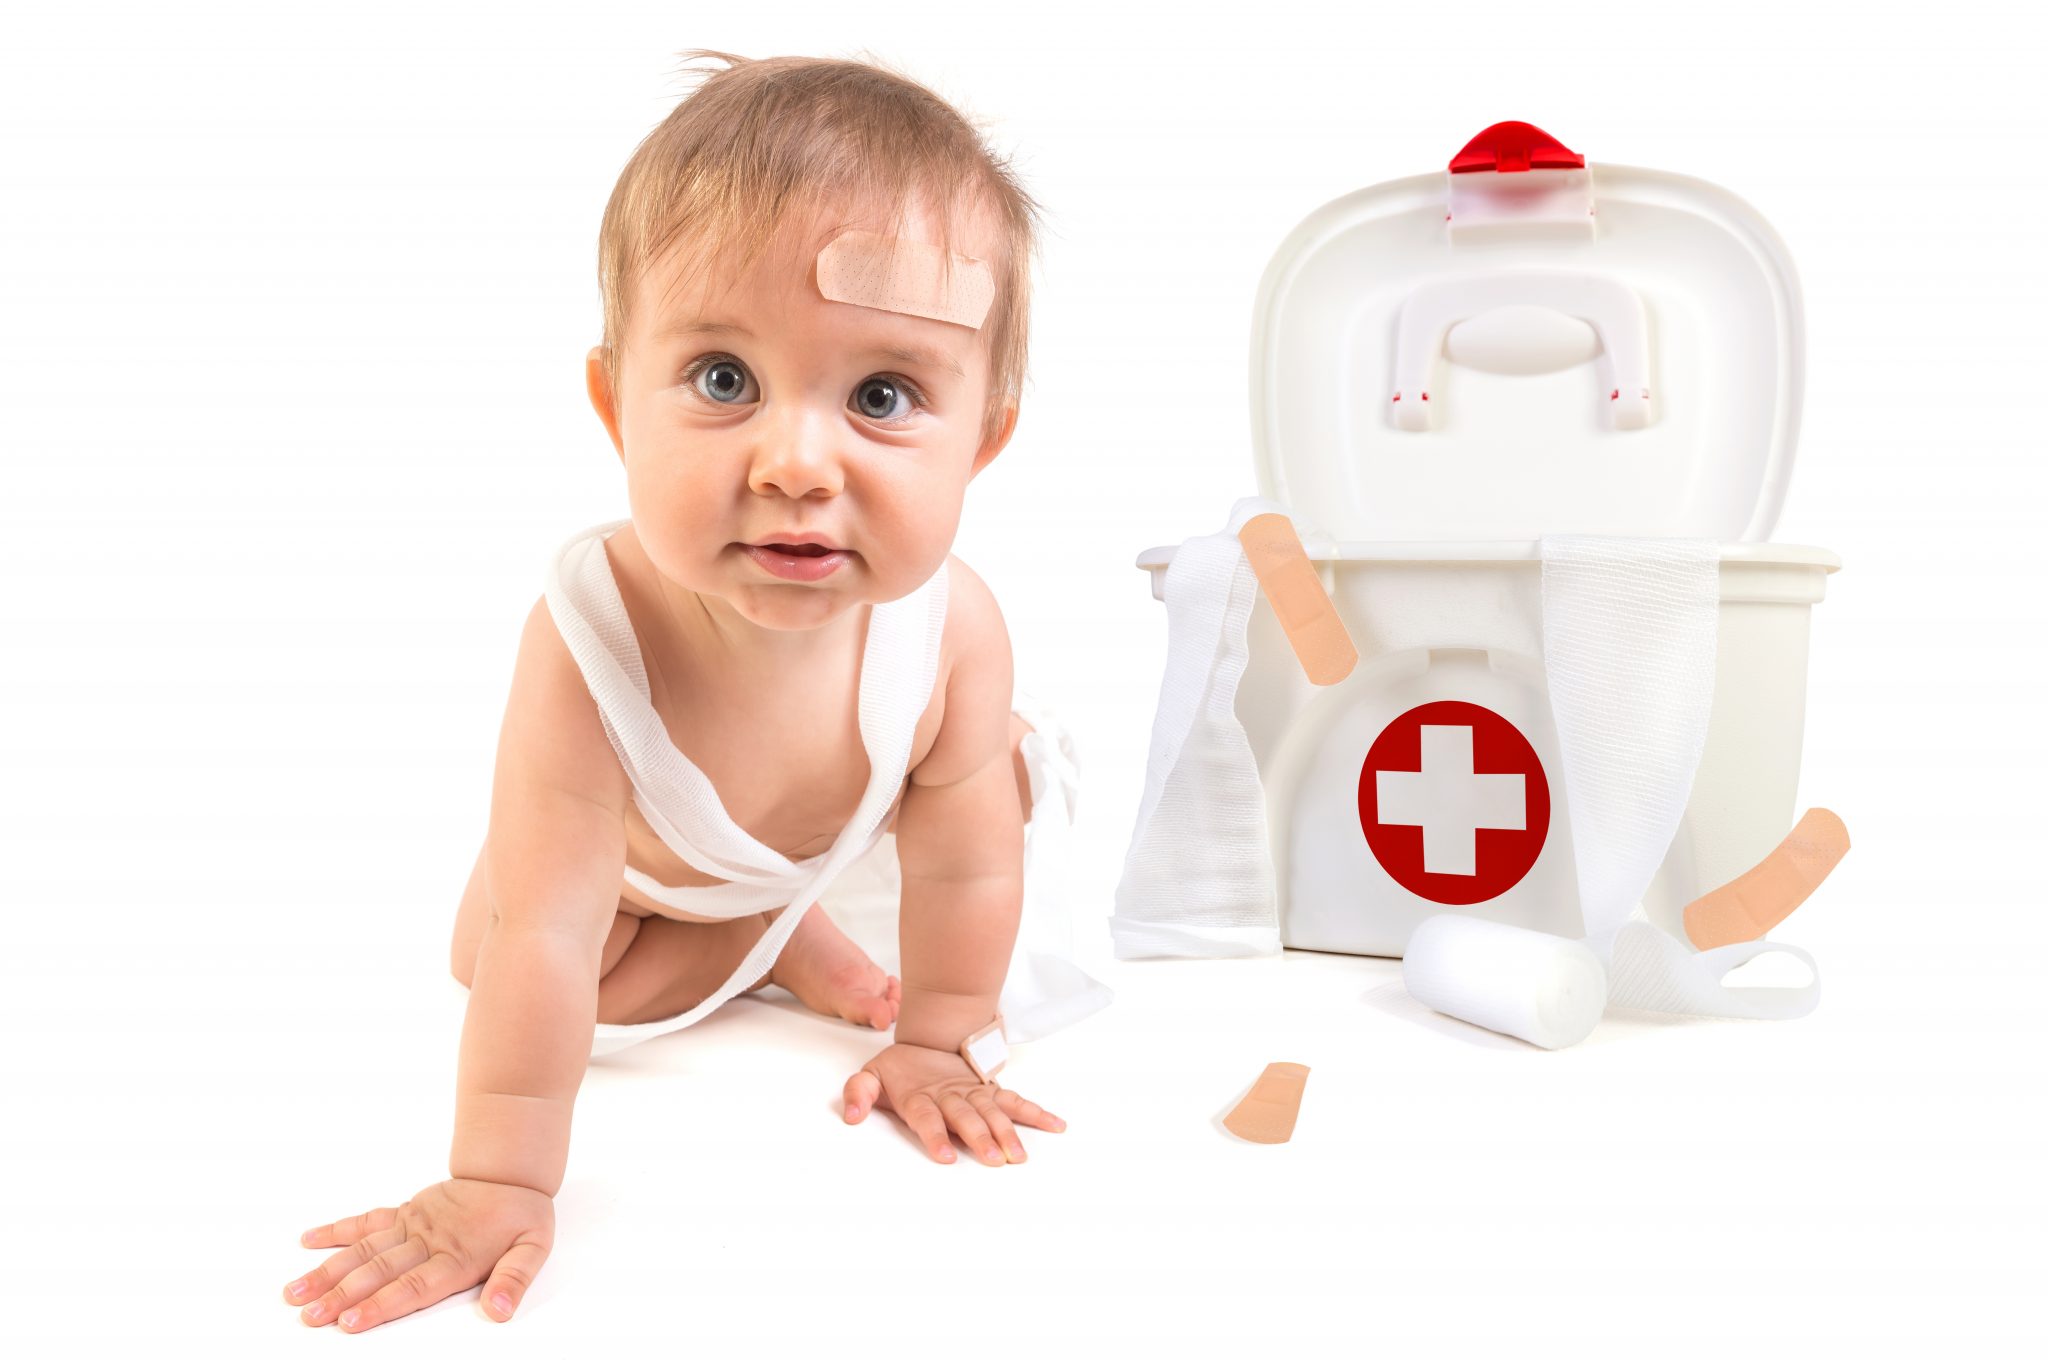 Paediatric First Aid Millie's Mark launches in Scotland